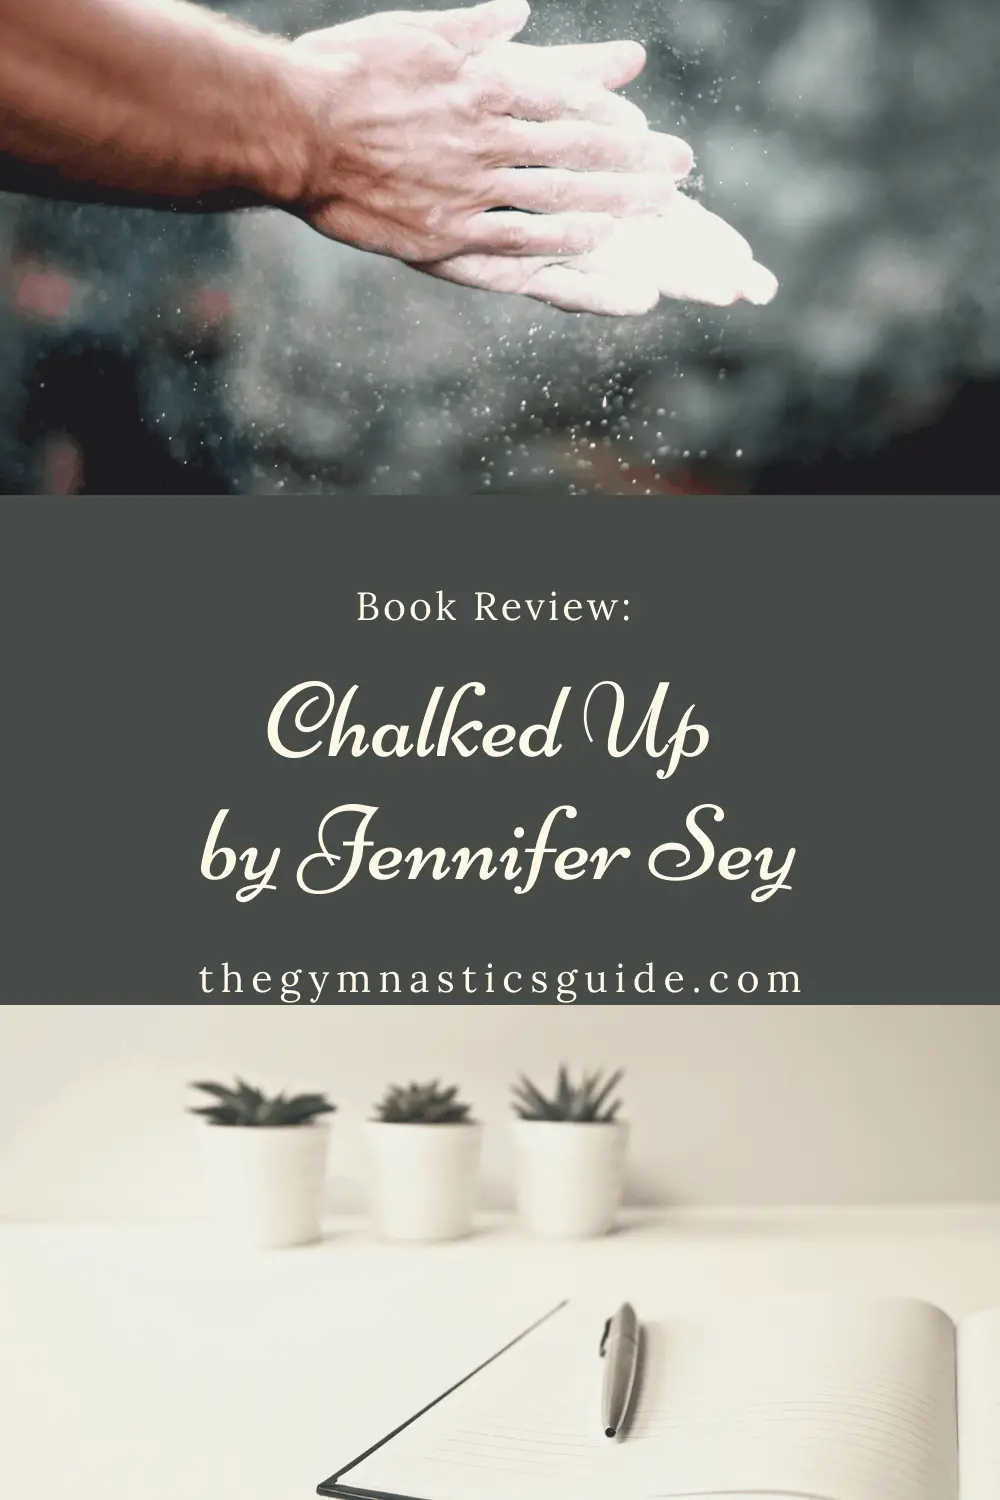 Book Review: “Chalked Up” by Jennifer Sey